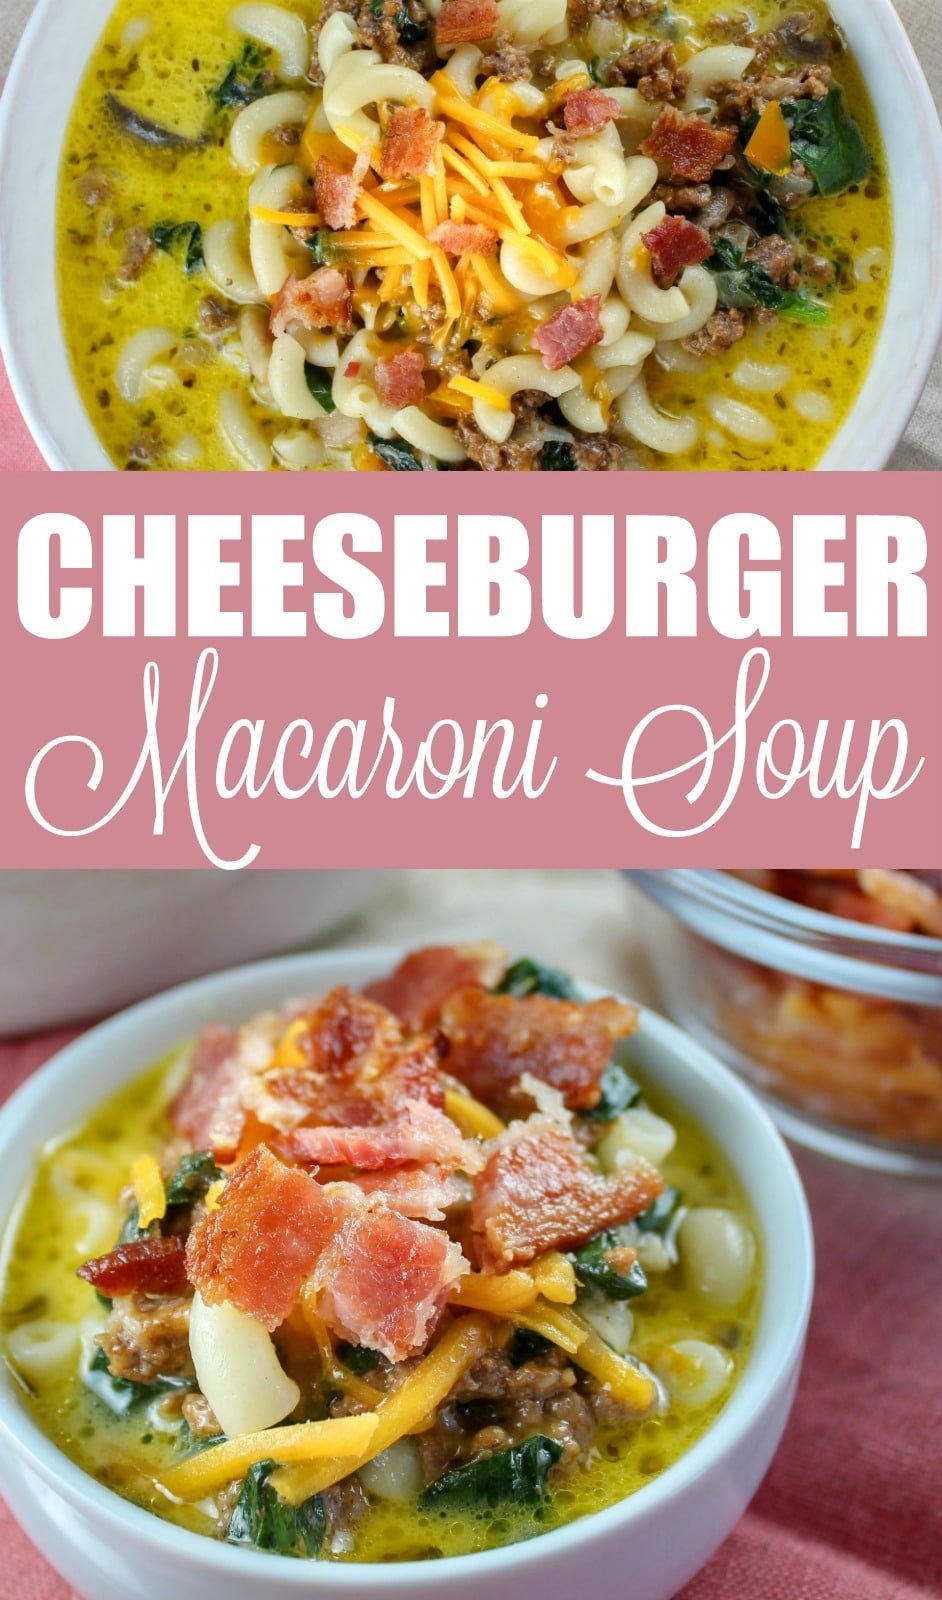 Cheeseburger Macaroni Soup is the ultimate comfort food! It’s warm, cheesy, thick and delicious! This family-friendly recipe is easy to make and can be prepared in about 30 minutes. via @foodhussy